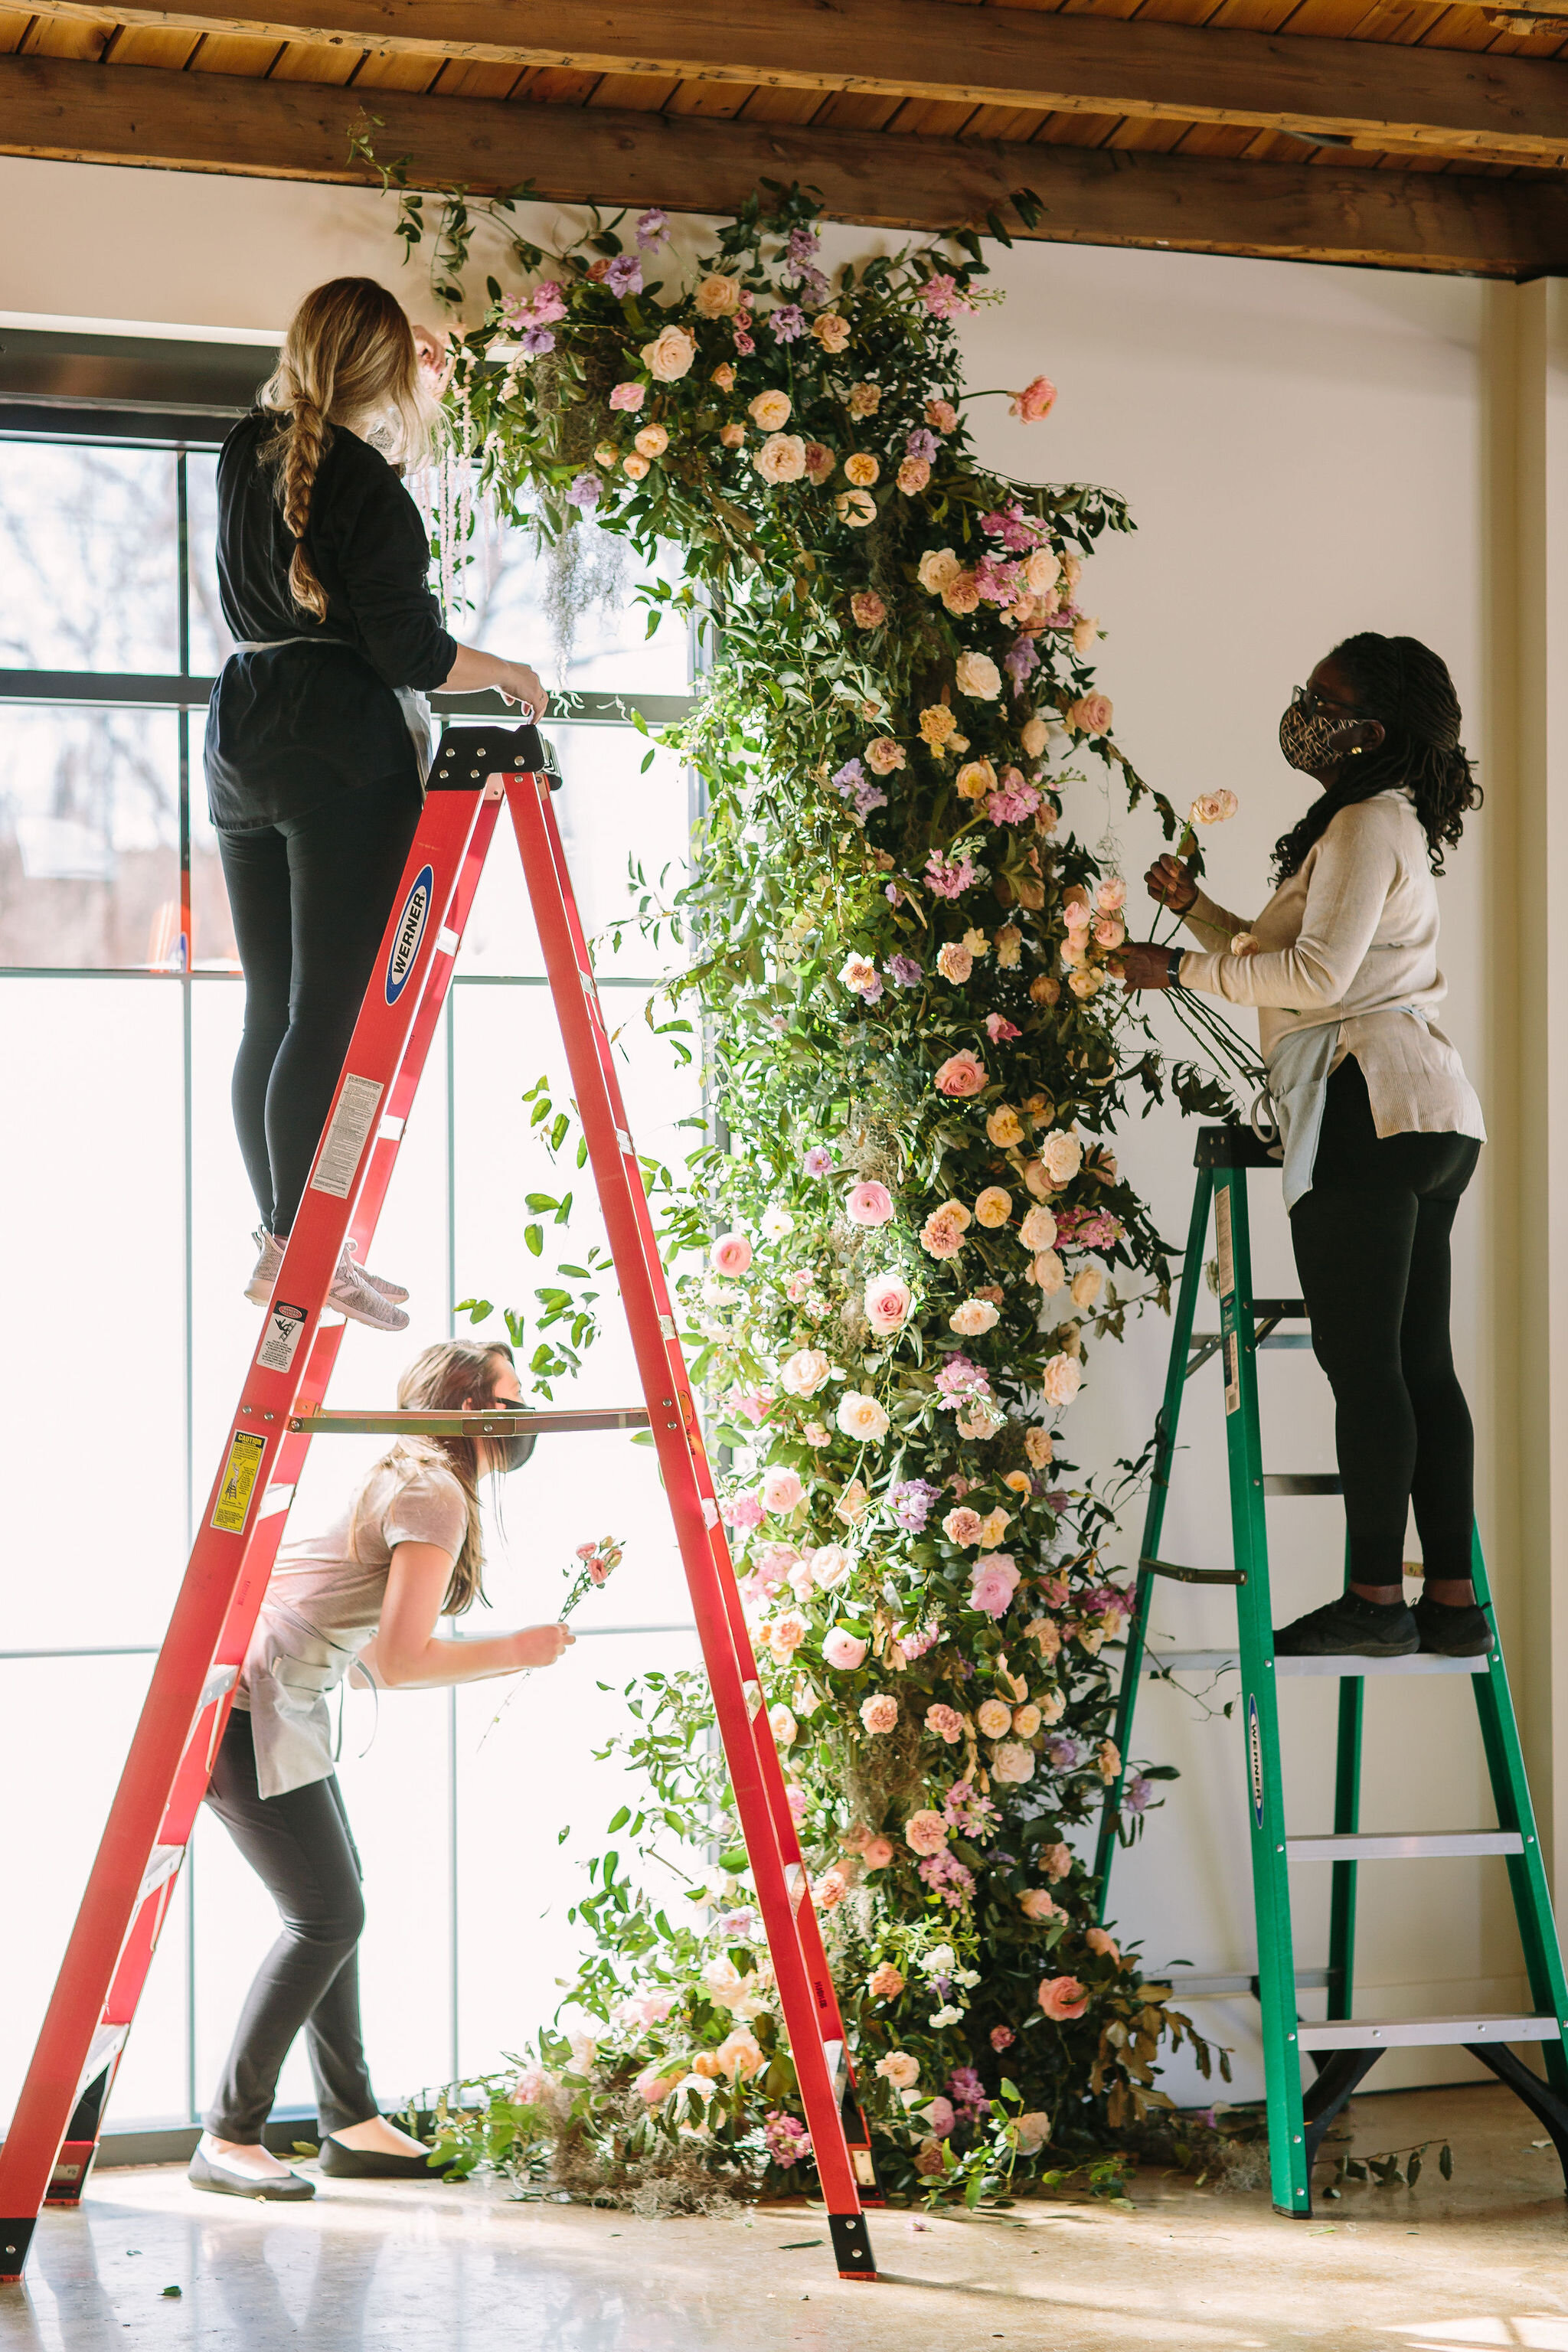 An intimate installation intensive at The Saint Elle in Nashville. Students learned how to create and build 3 different kinds of installations. This climbing window install is filled with flowers in pastel hues including petal heavy roses, lavender …